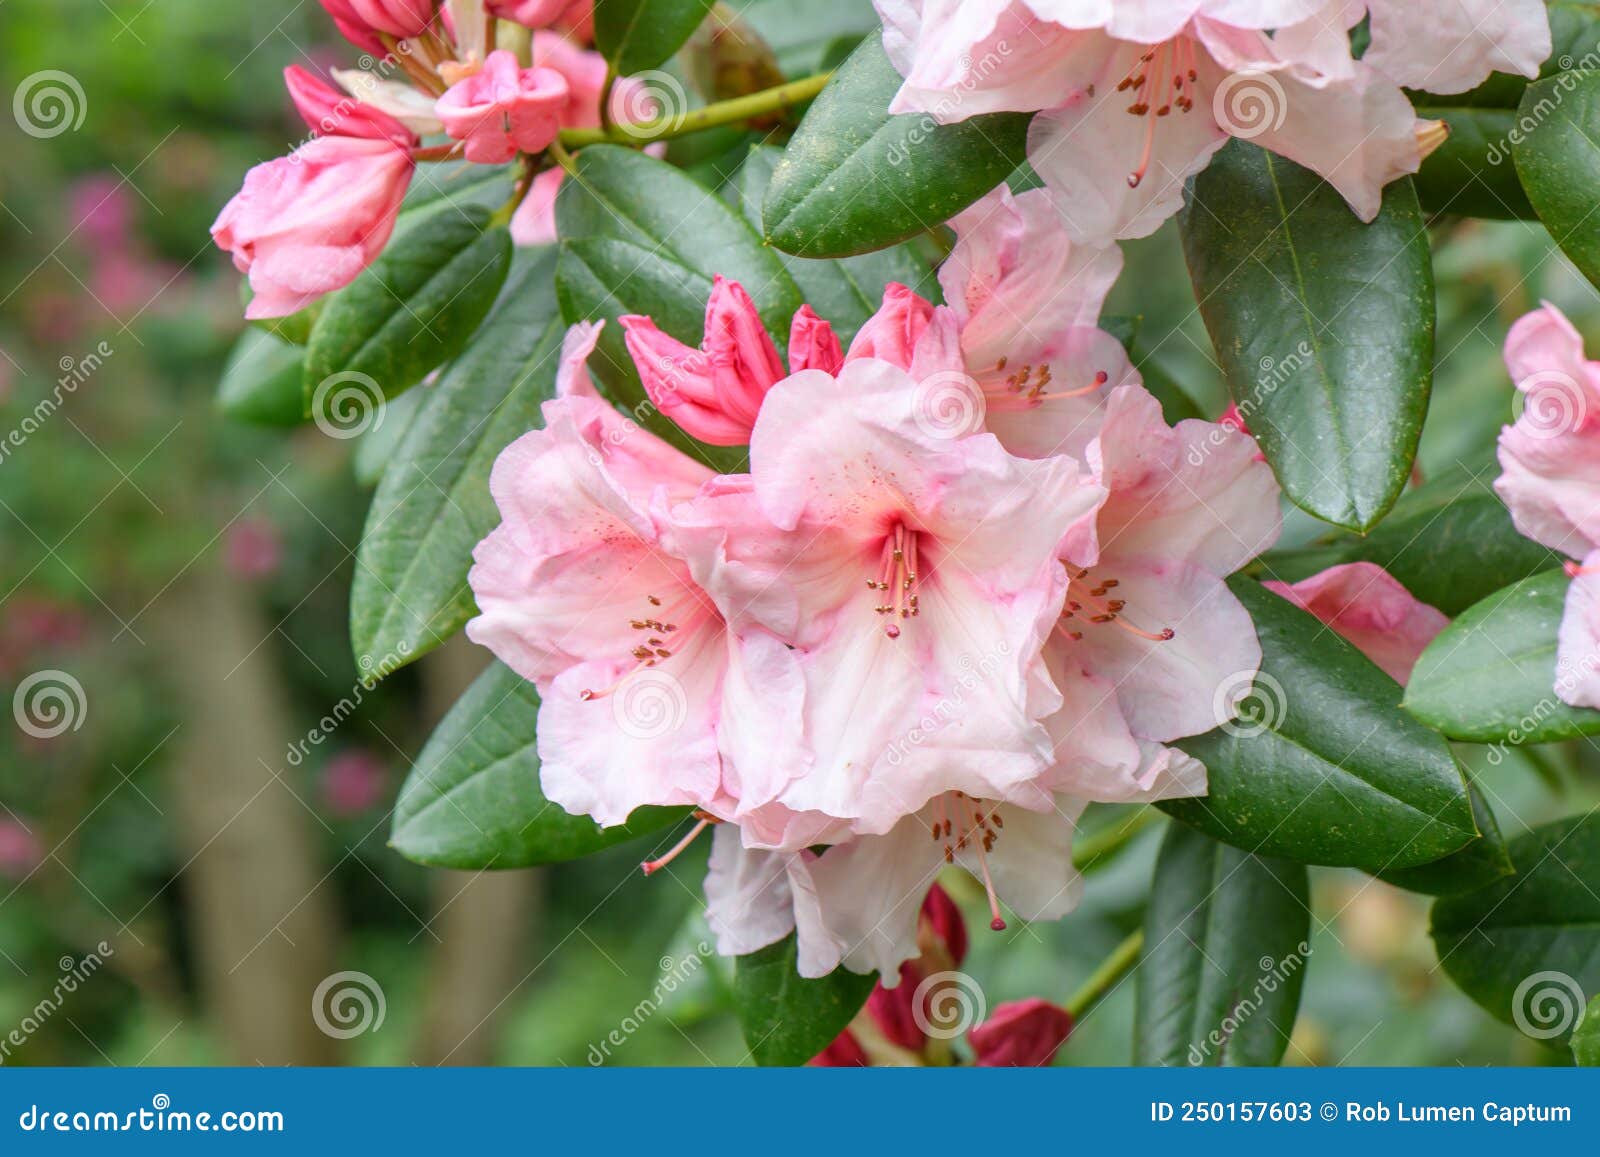 hybrid rhododendron virginia richards, orange-pink lowers and pink buds